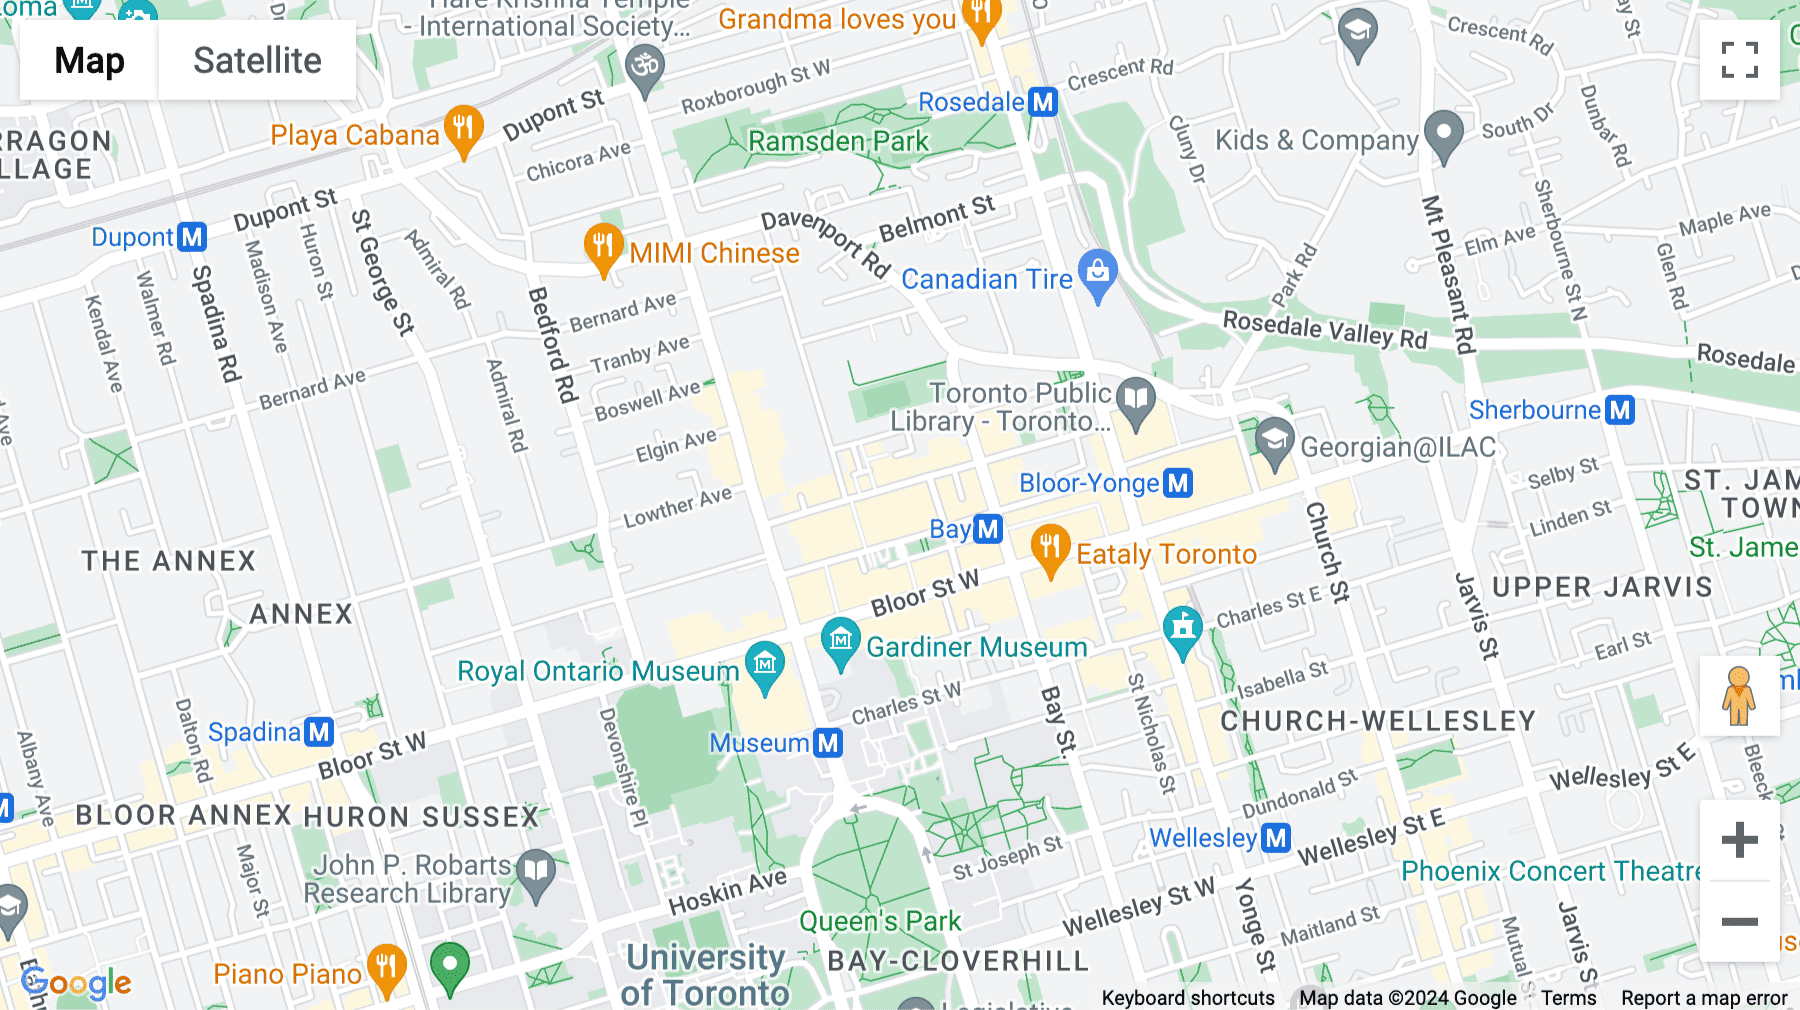 Click for interative map of 99 Yorkville Avenue, Toronto